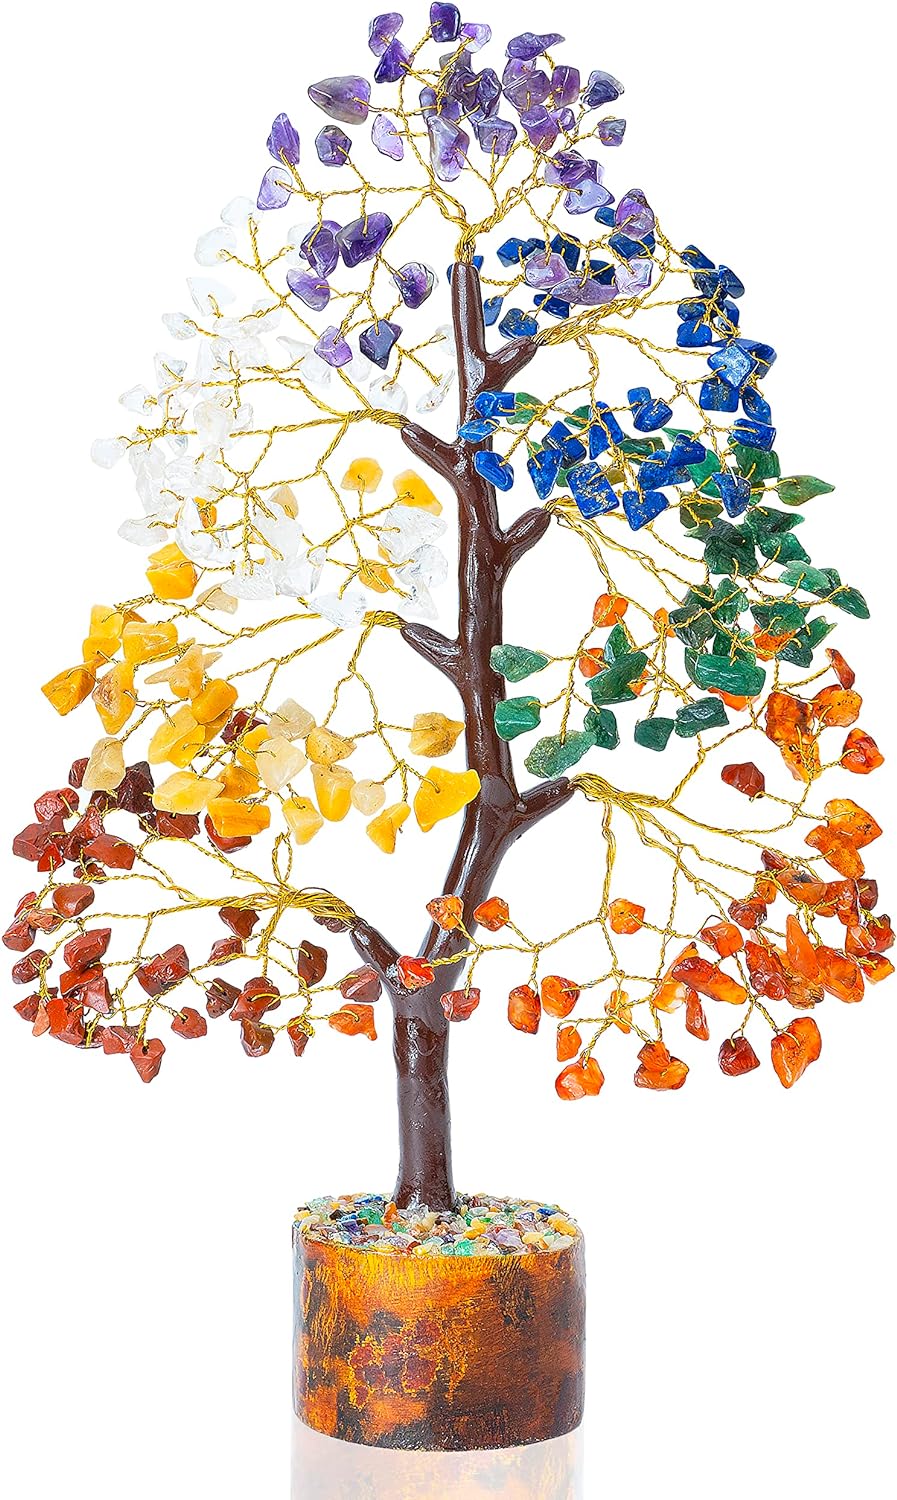 7 Chakra Tree of Life - Feng Shui Money Tree, Gemstone Tree for Positive Energy, Seven Chakra Crystal Tree - Attract Good Luck - Home Decoration, Spiritual Gift for Wealth & Fortune 10-12"